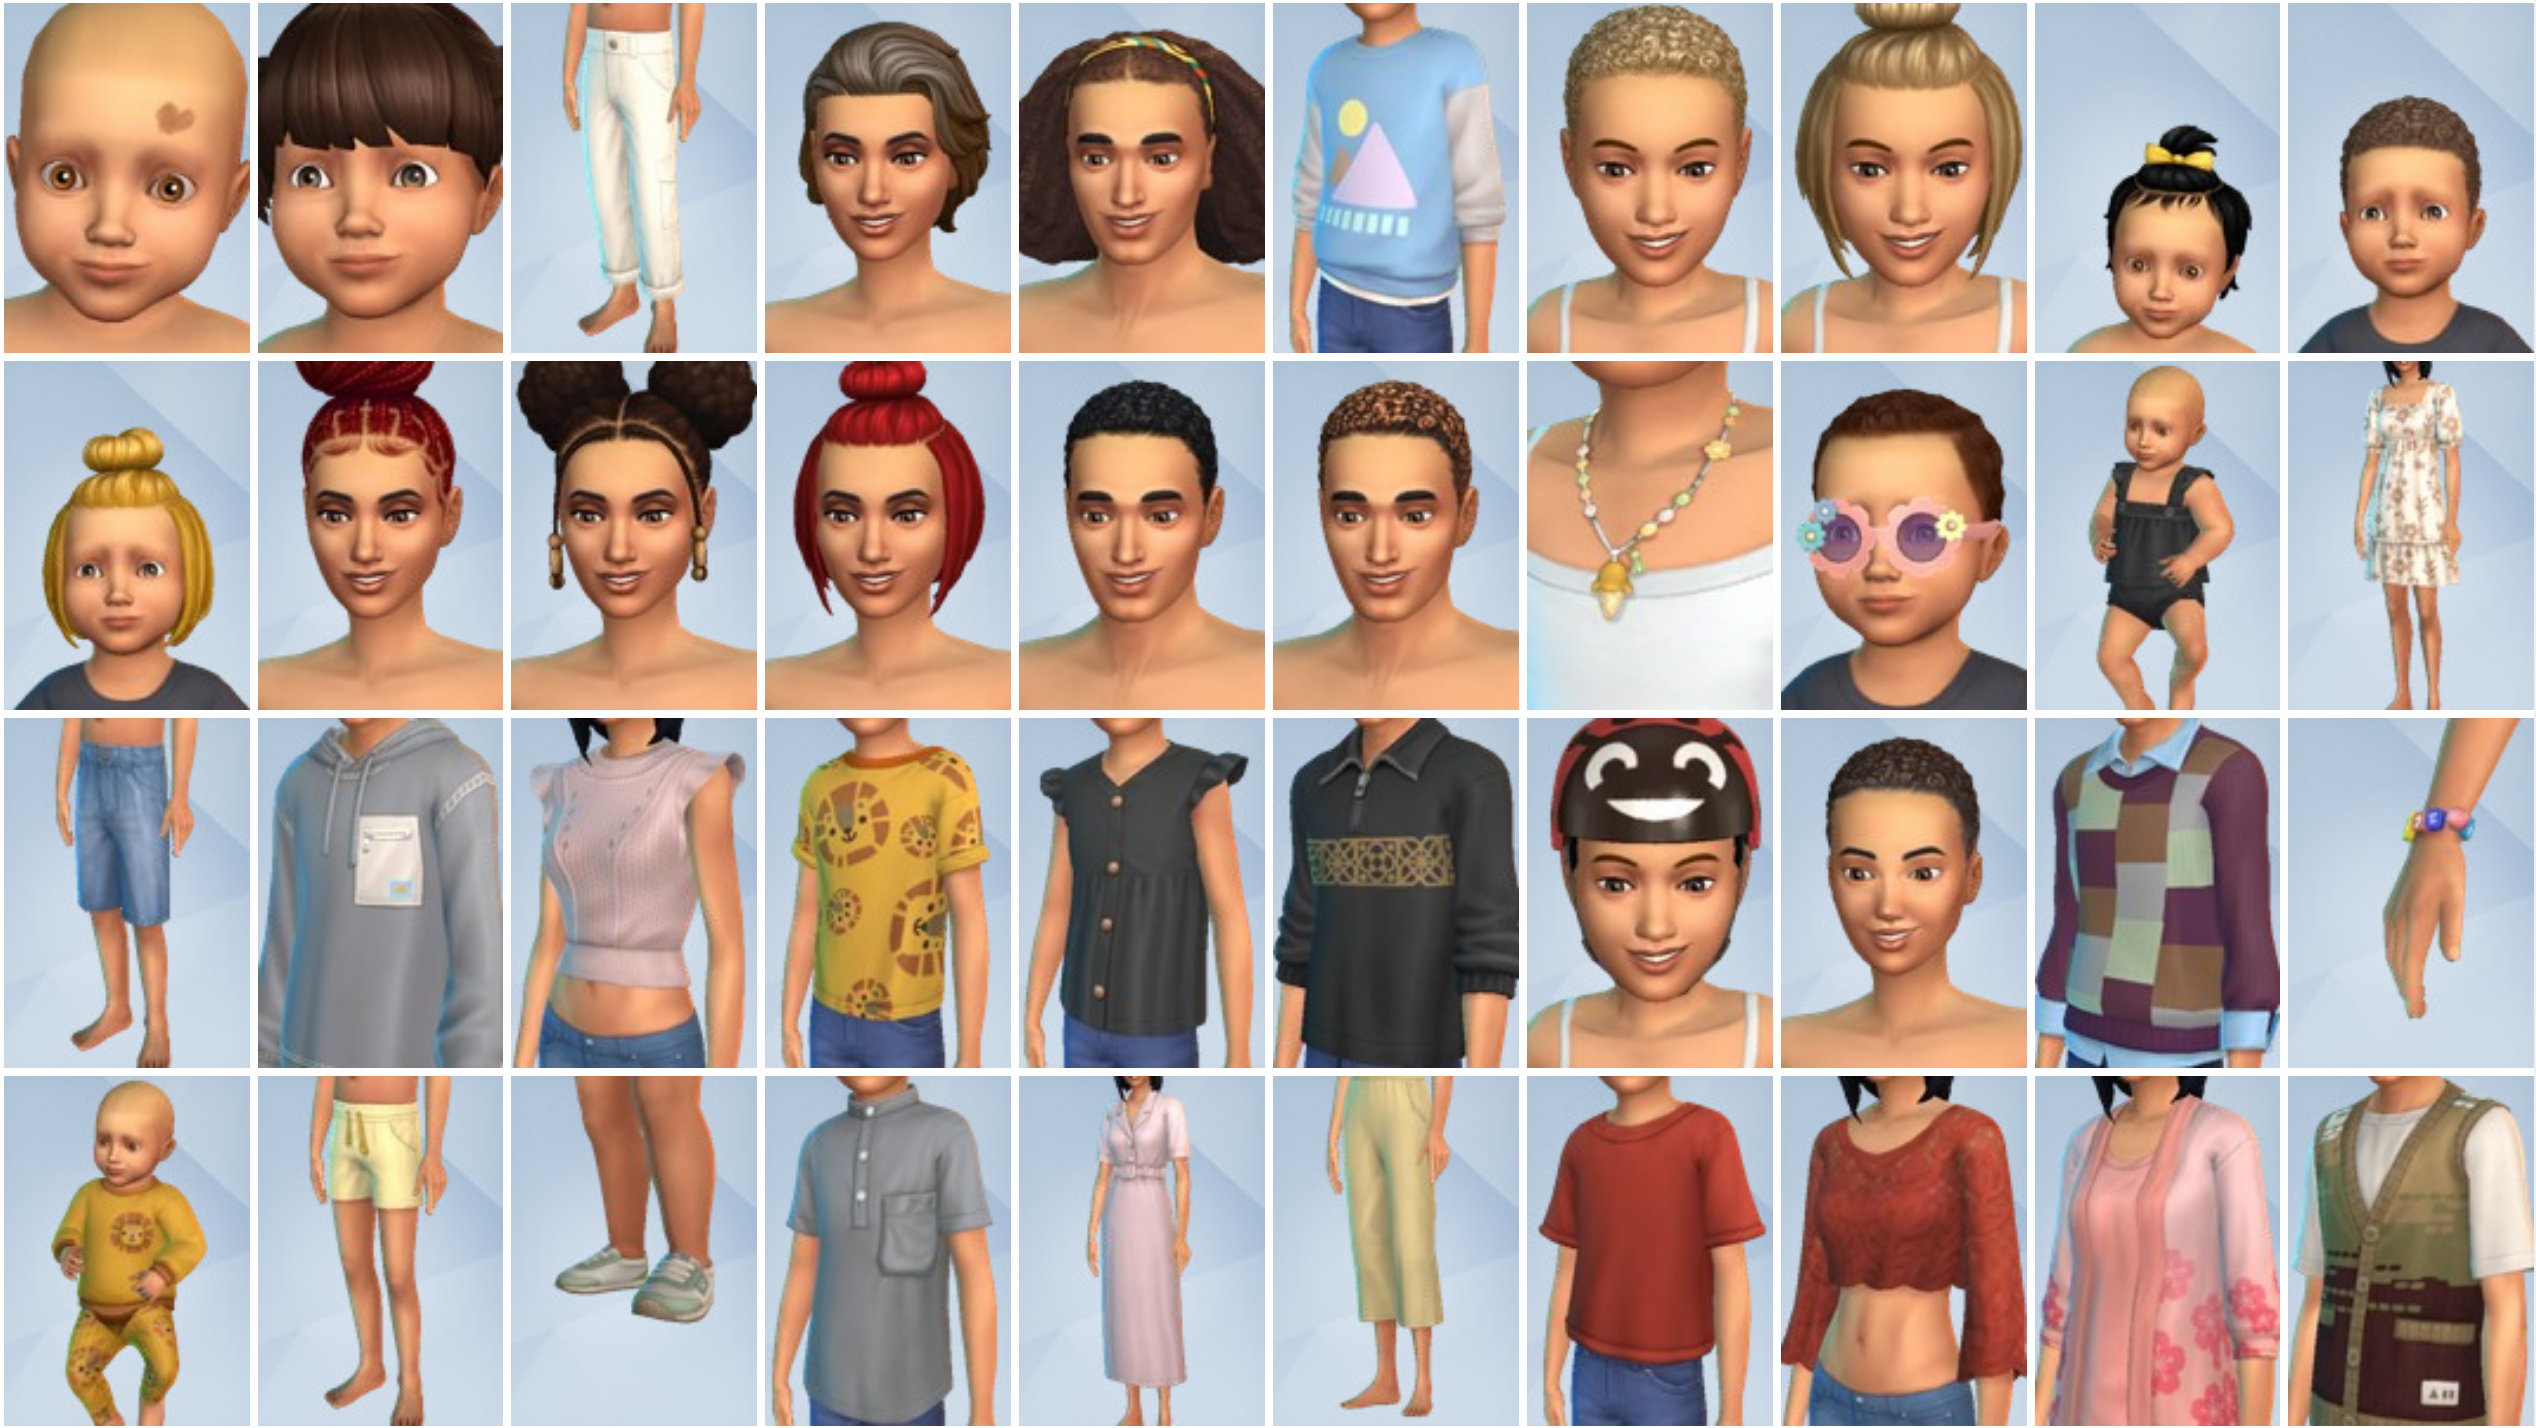 cecil galloway add sims 4 muscle growth photo